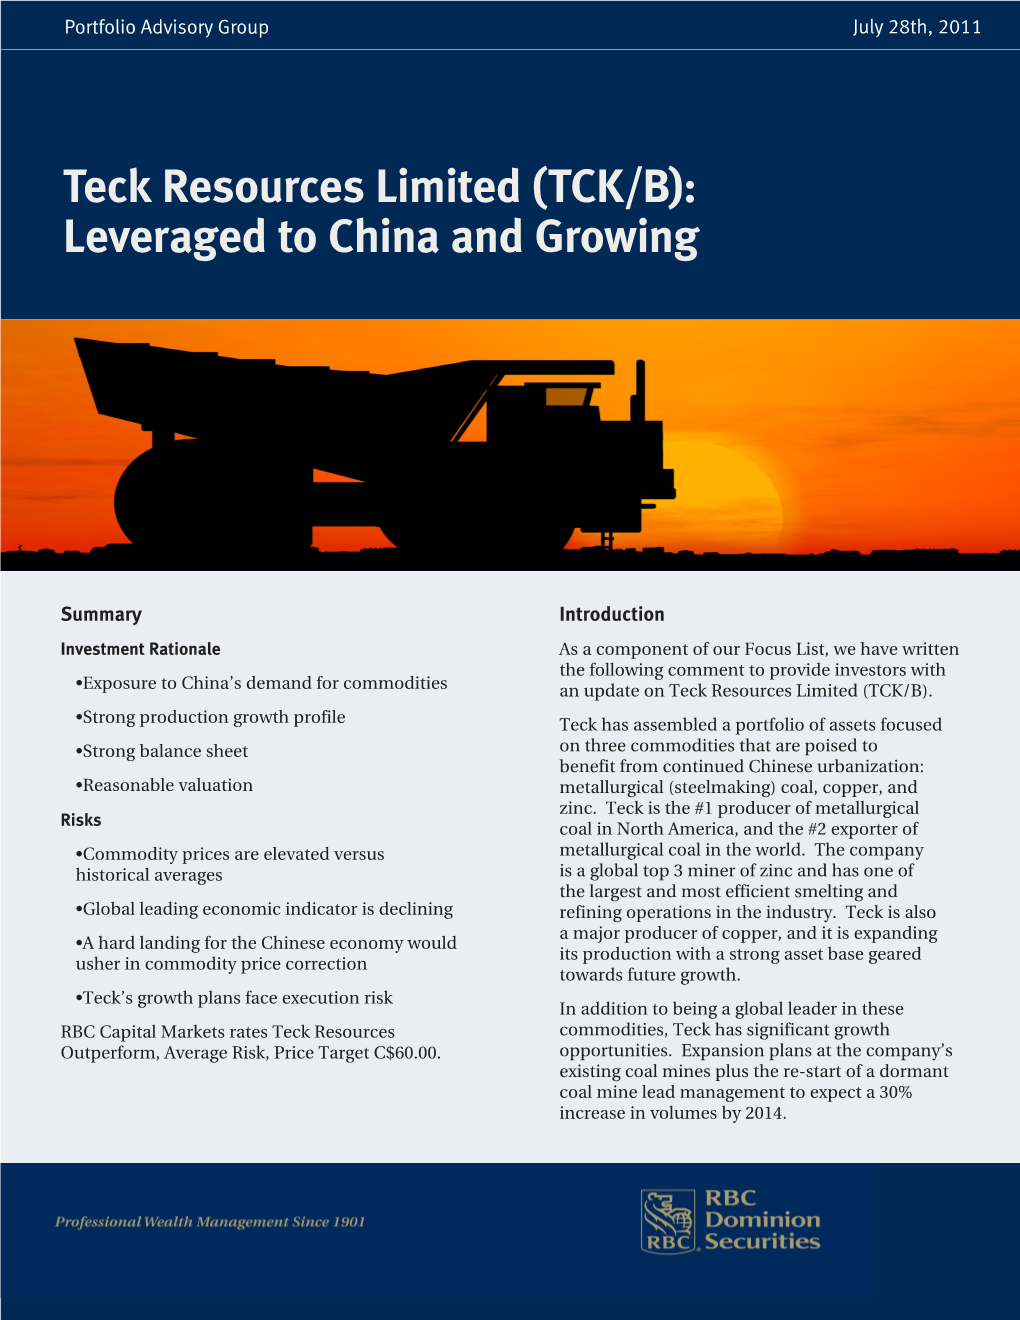 Teck Resources Limited (TCK/B): Leveraged to China and Growing